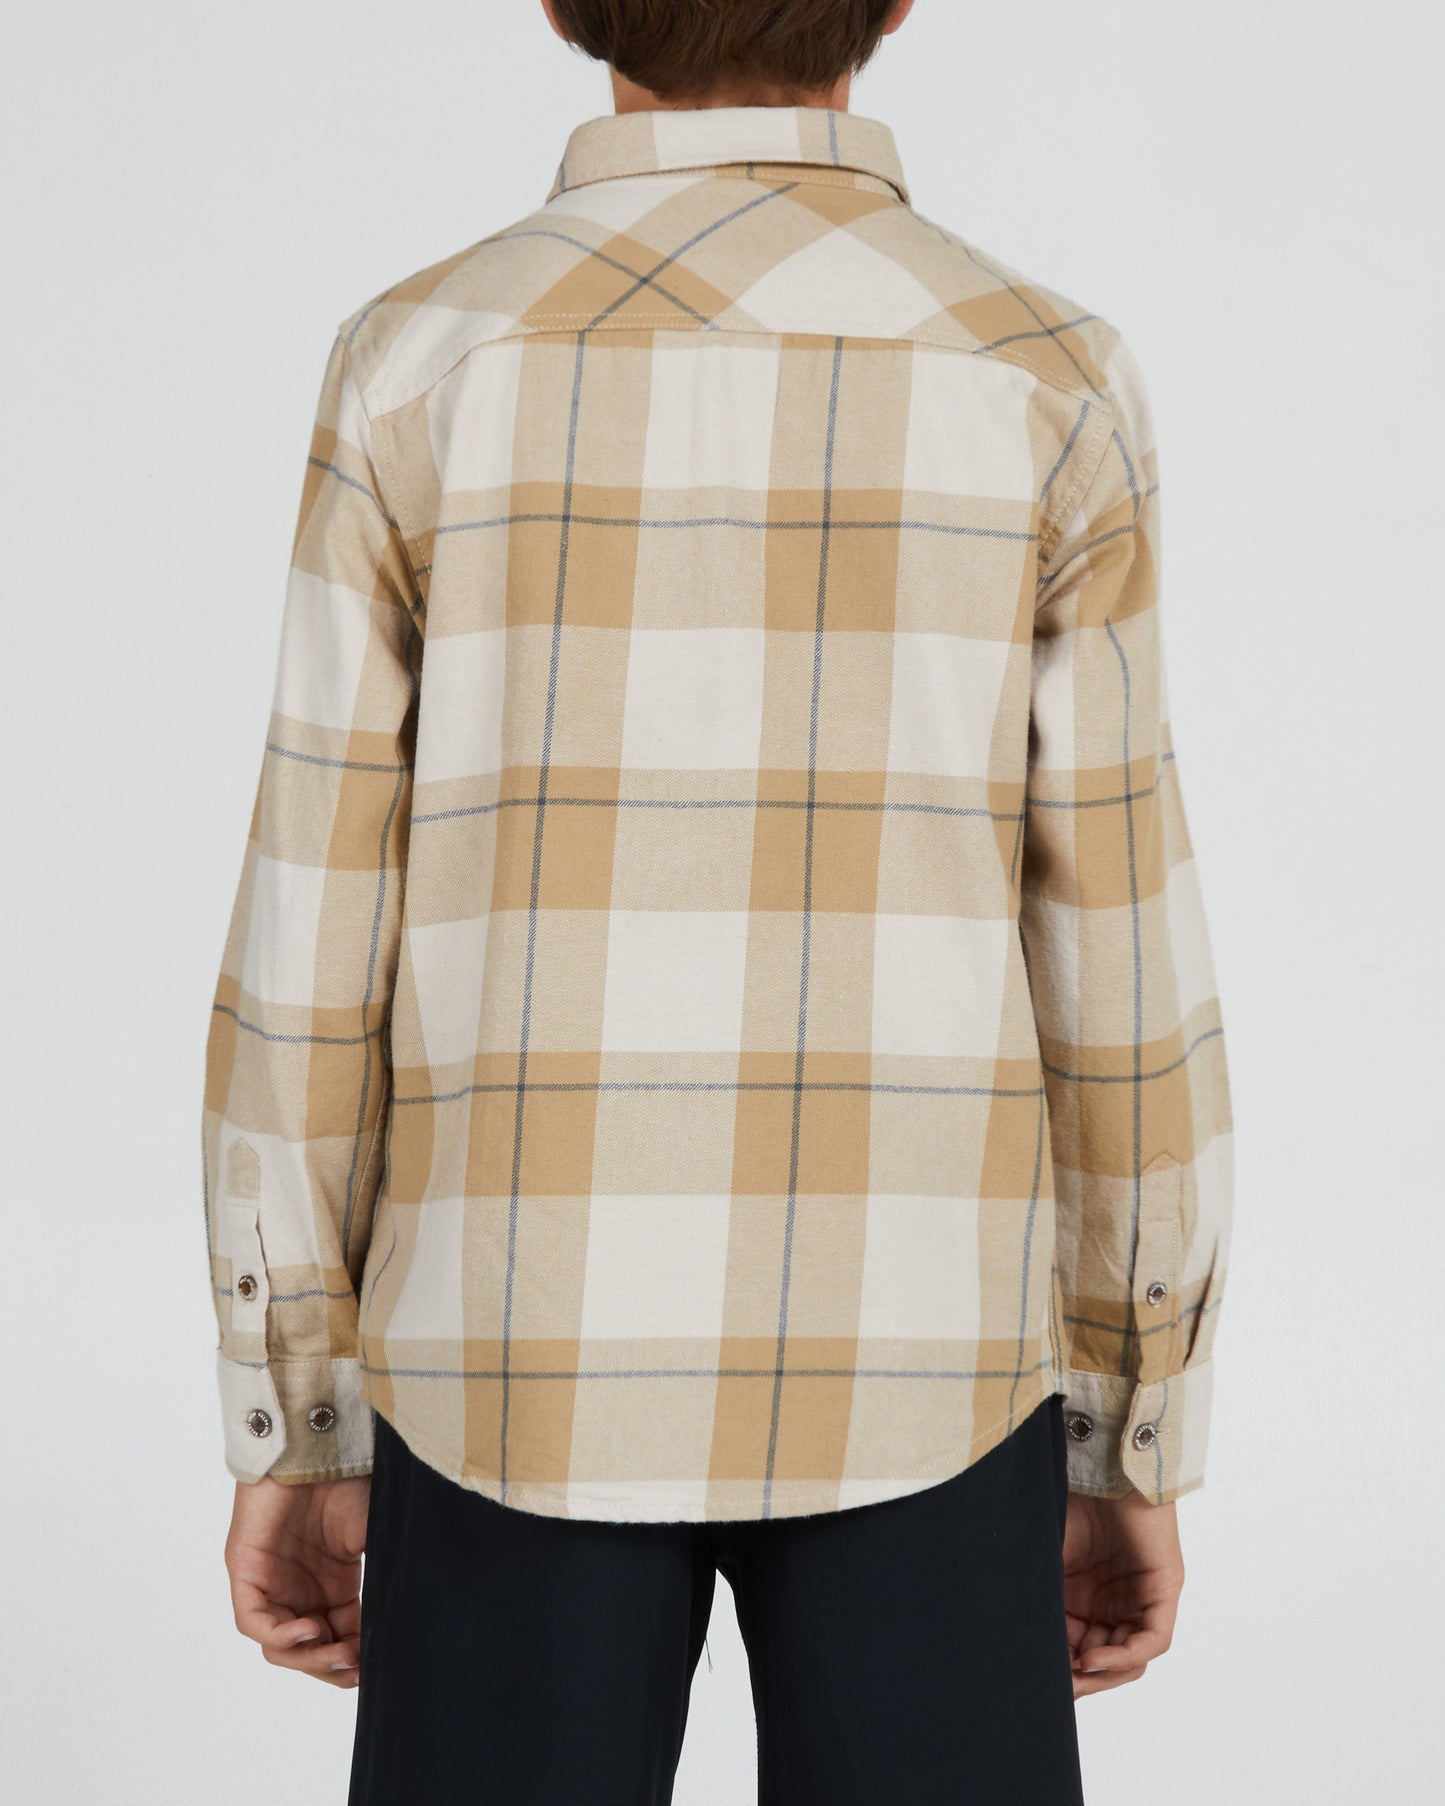 On body back of the First Light Boys Peyote L/S Flannel